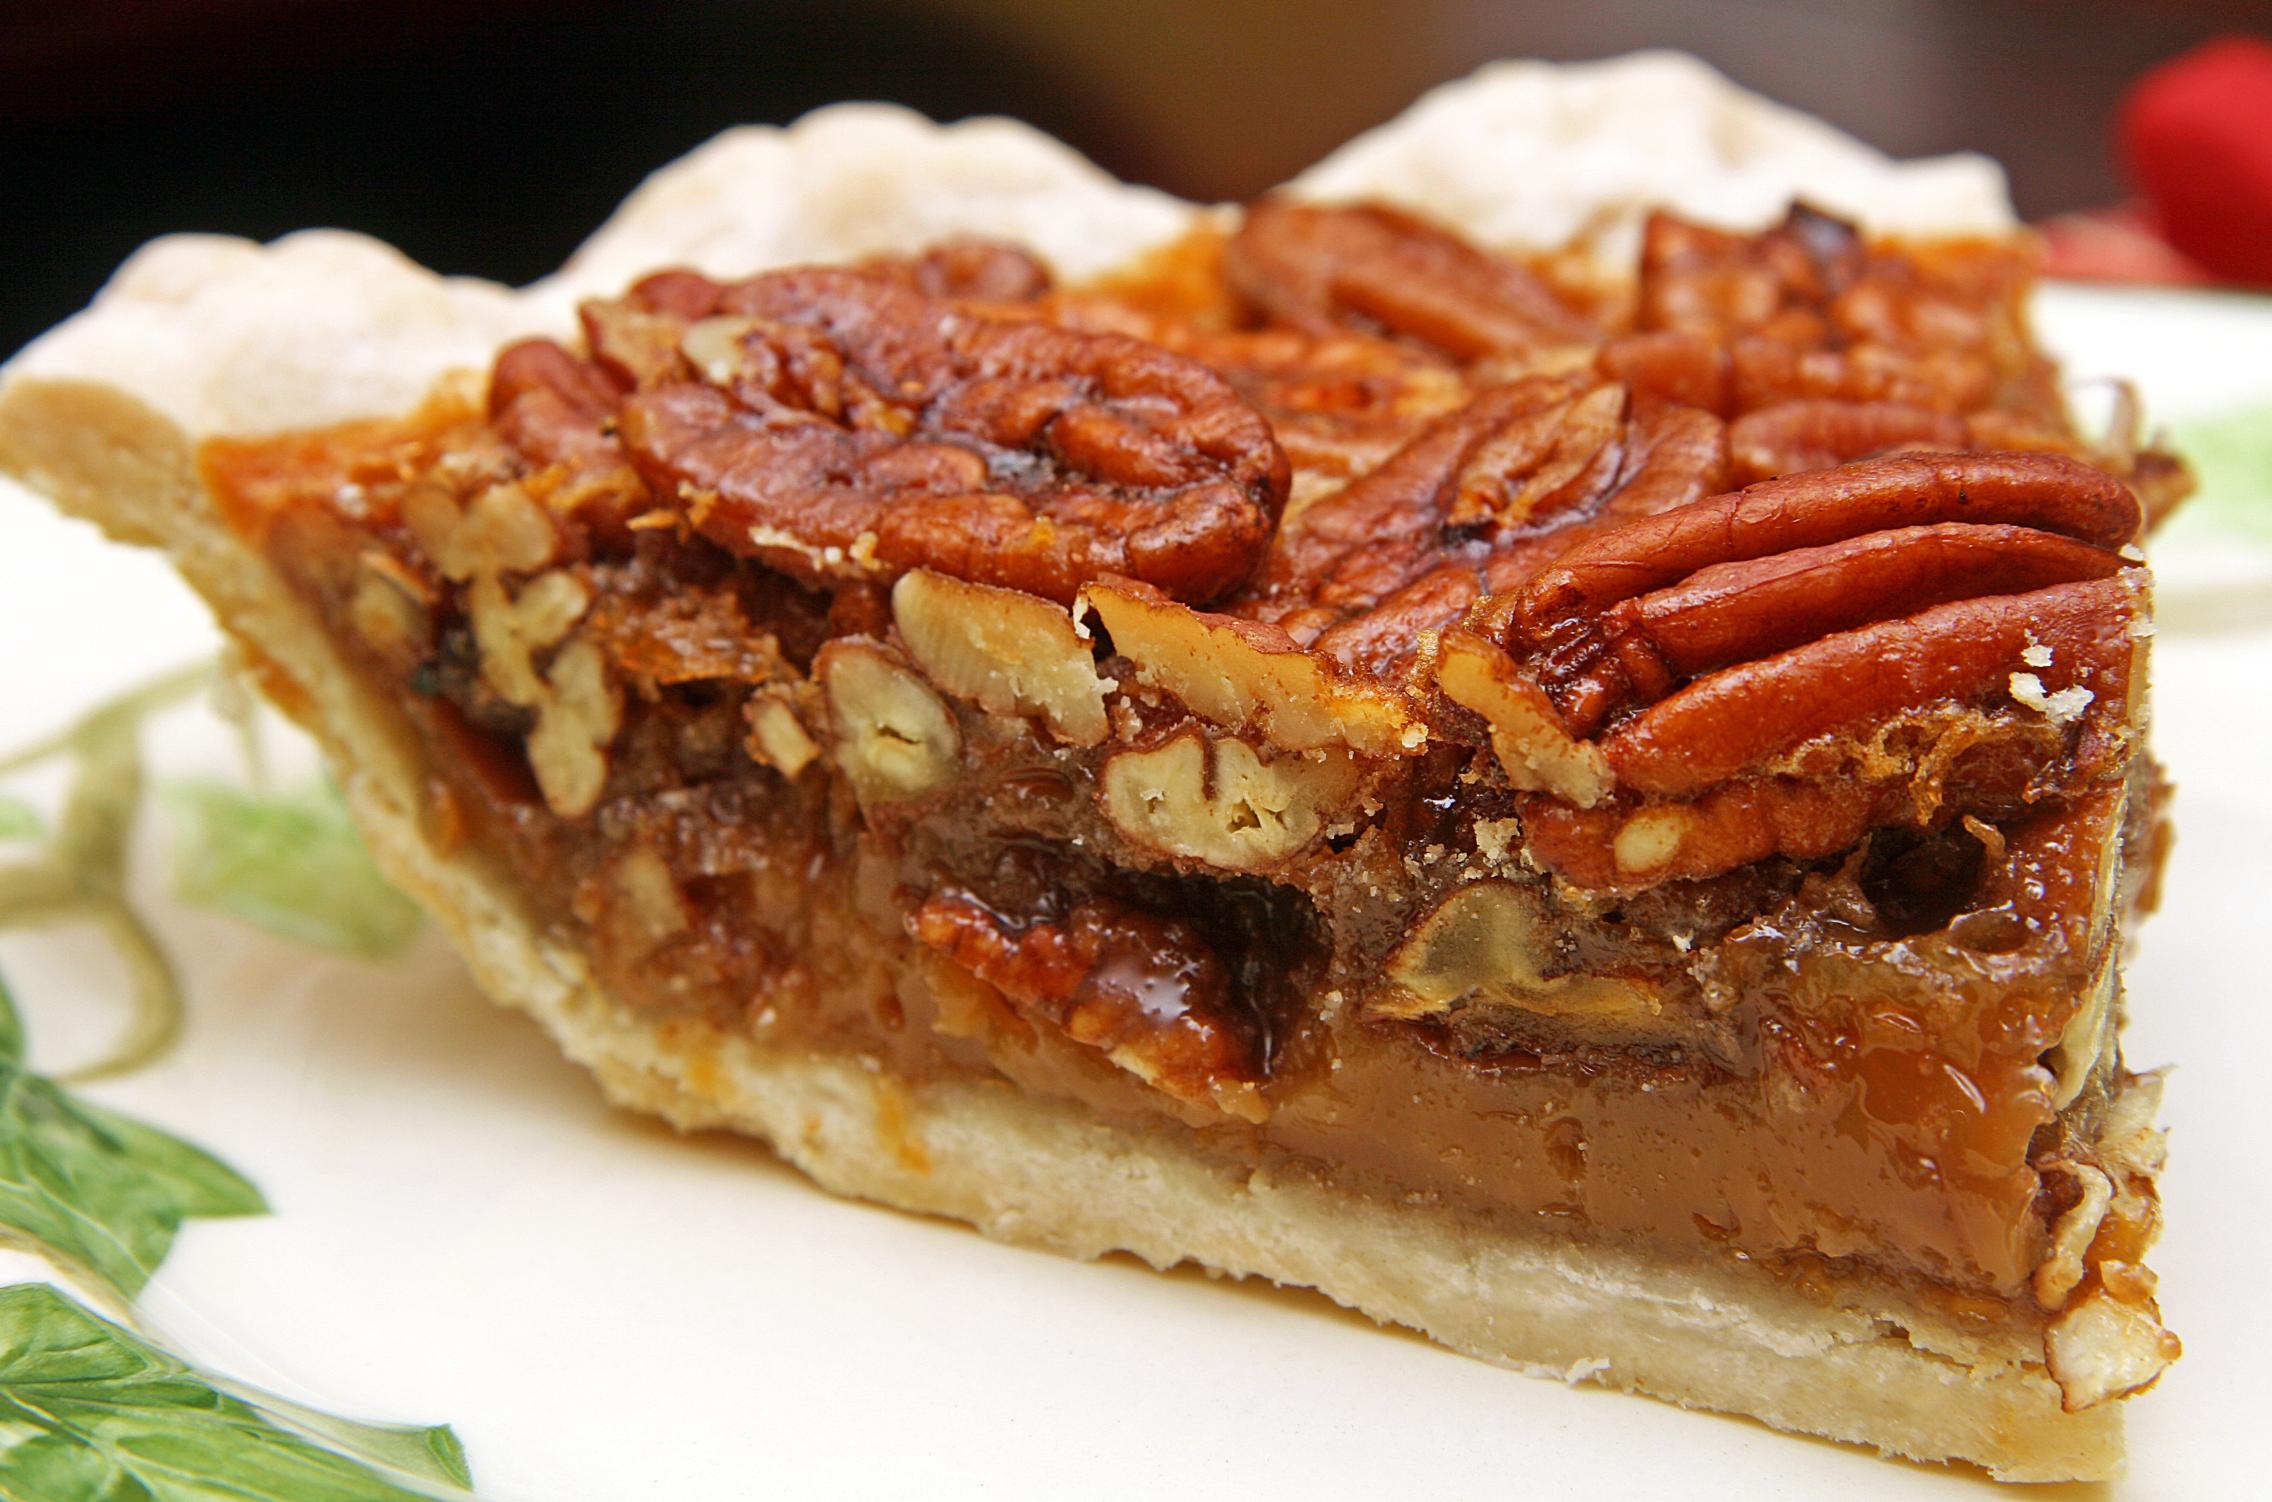 🥖🍞🥐 Can You Name These Pastries? 10 Pecan pie